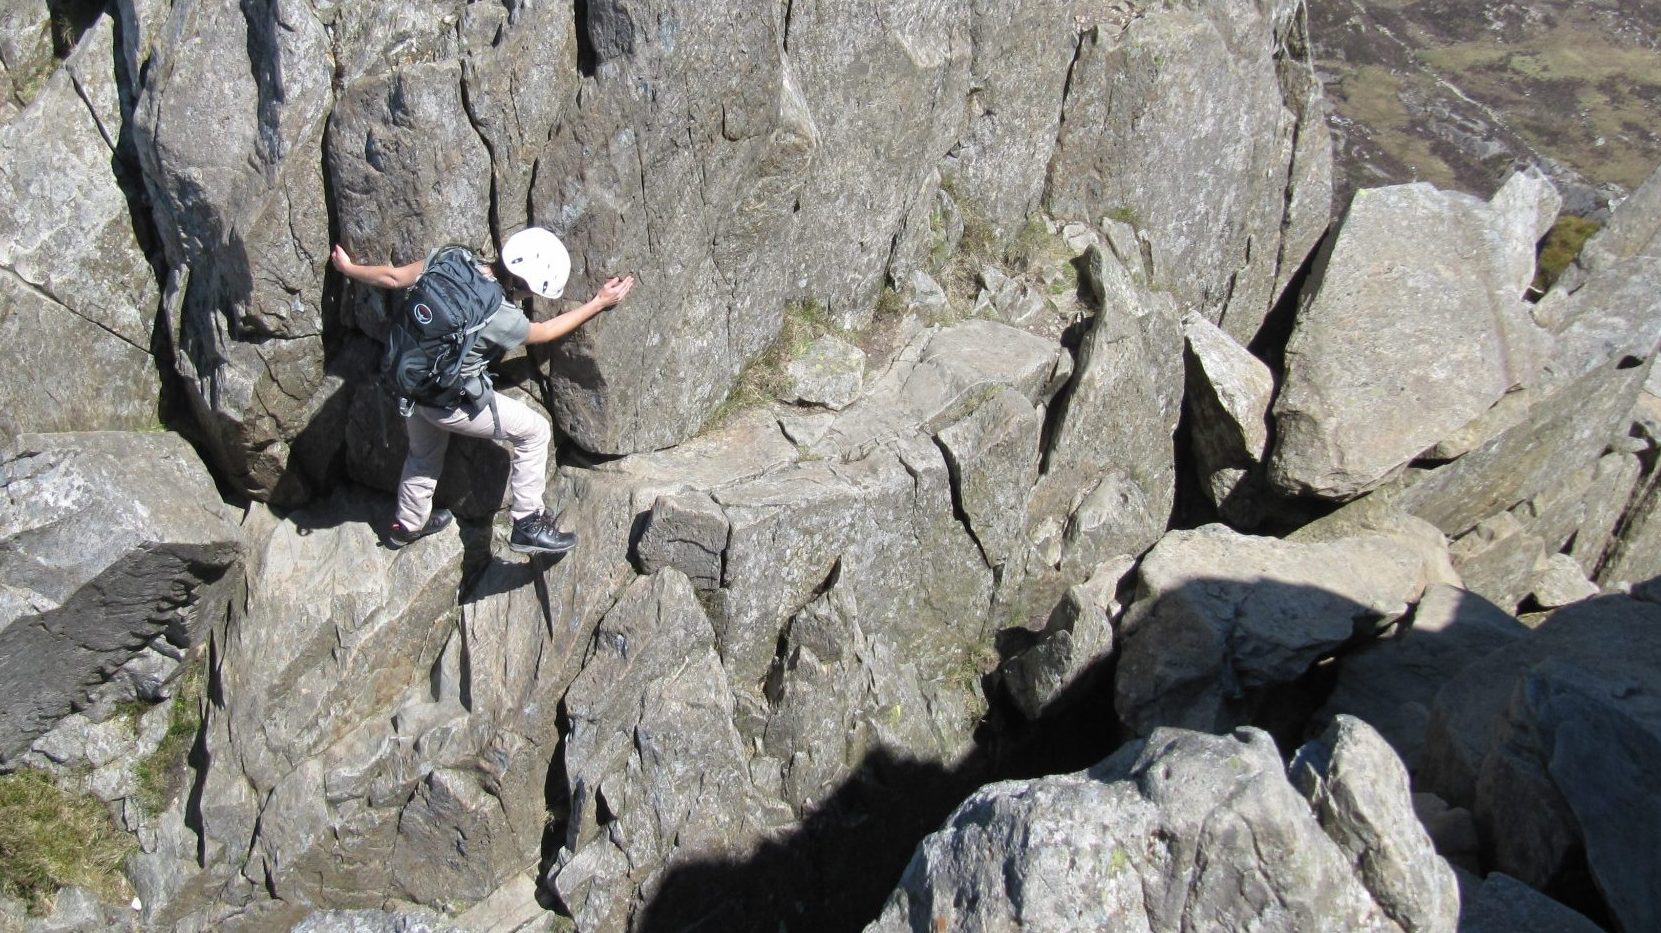 Descending into 'The Notch' on the North Ridge of Tryfan